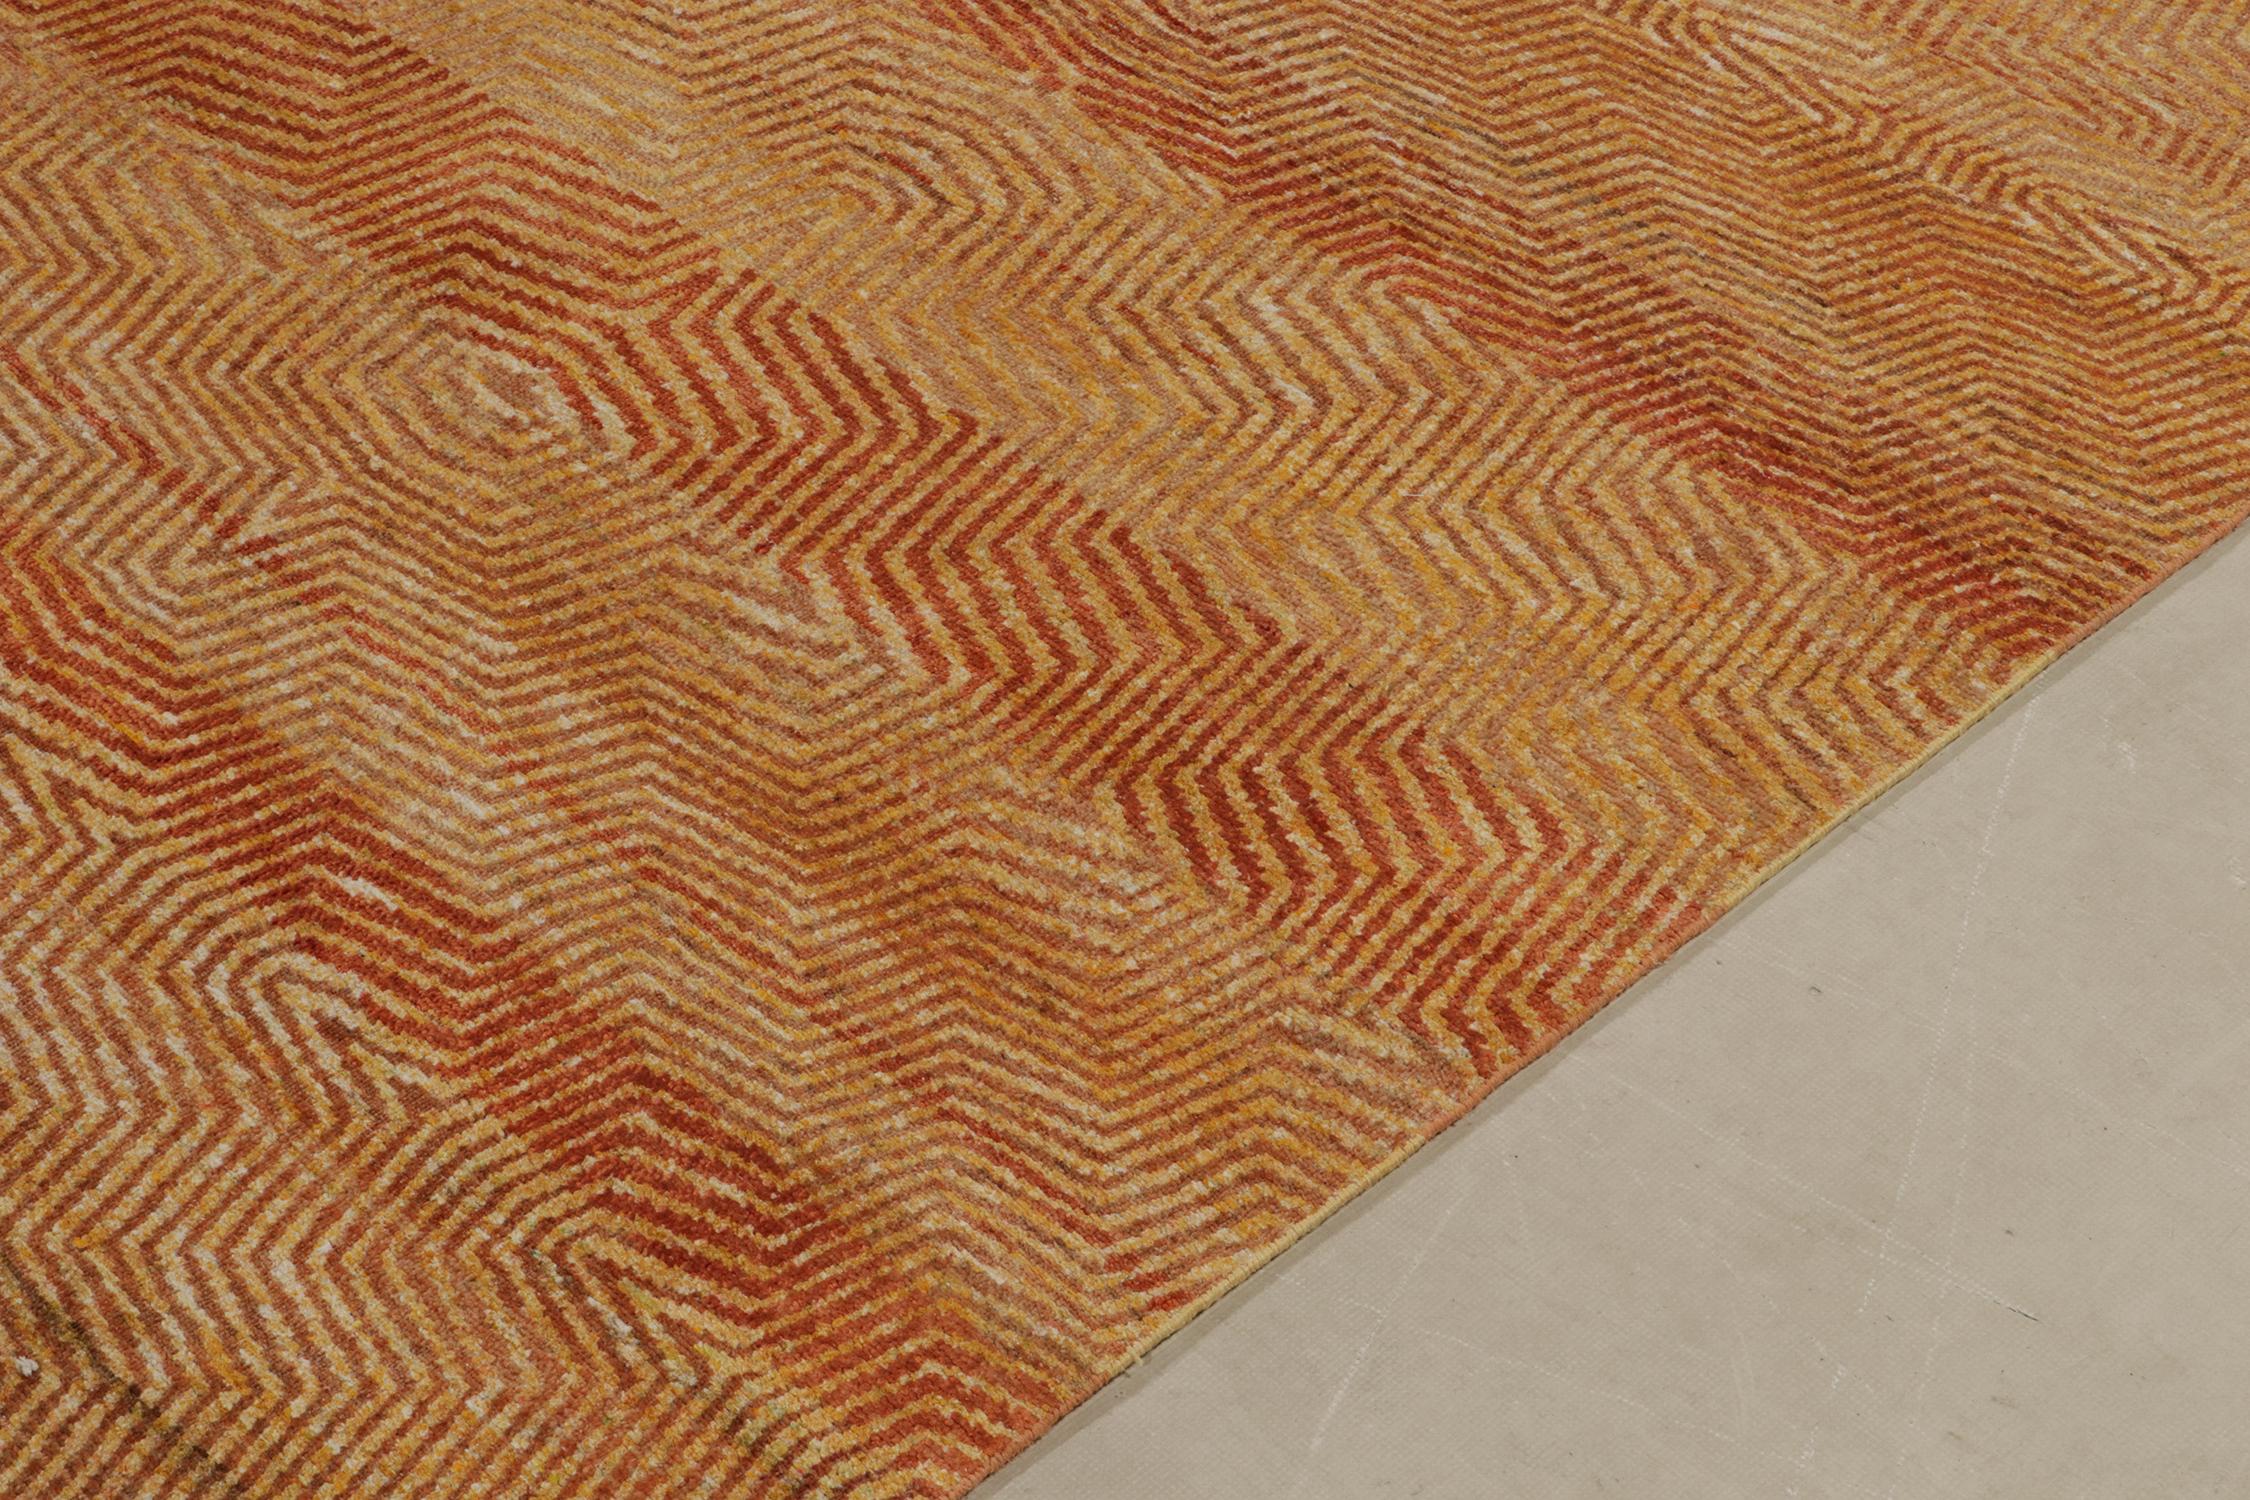 Indian Rug & Kilim’s Hand-Knotted Rug in Gold-Orange, Brown Striations For Sale